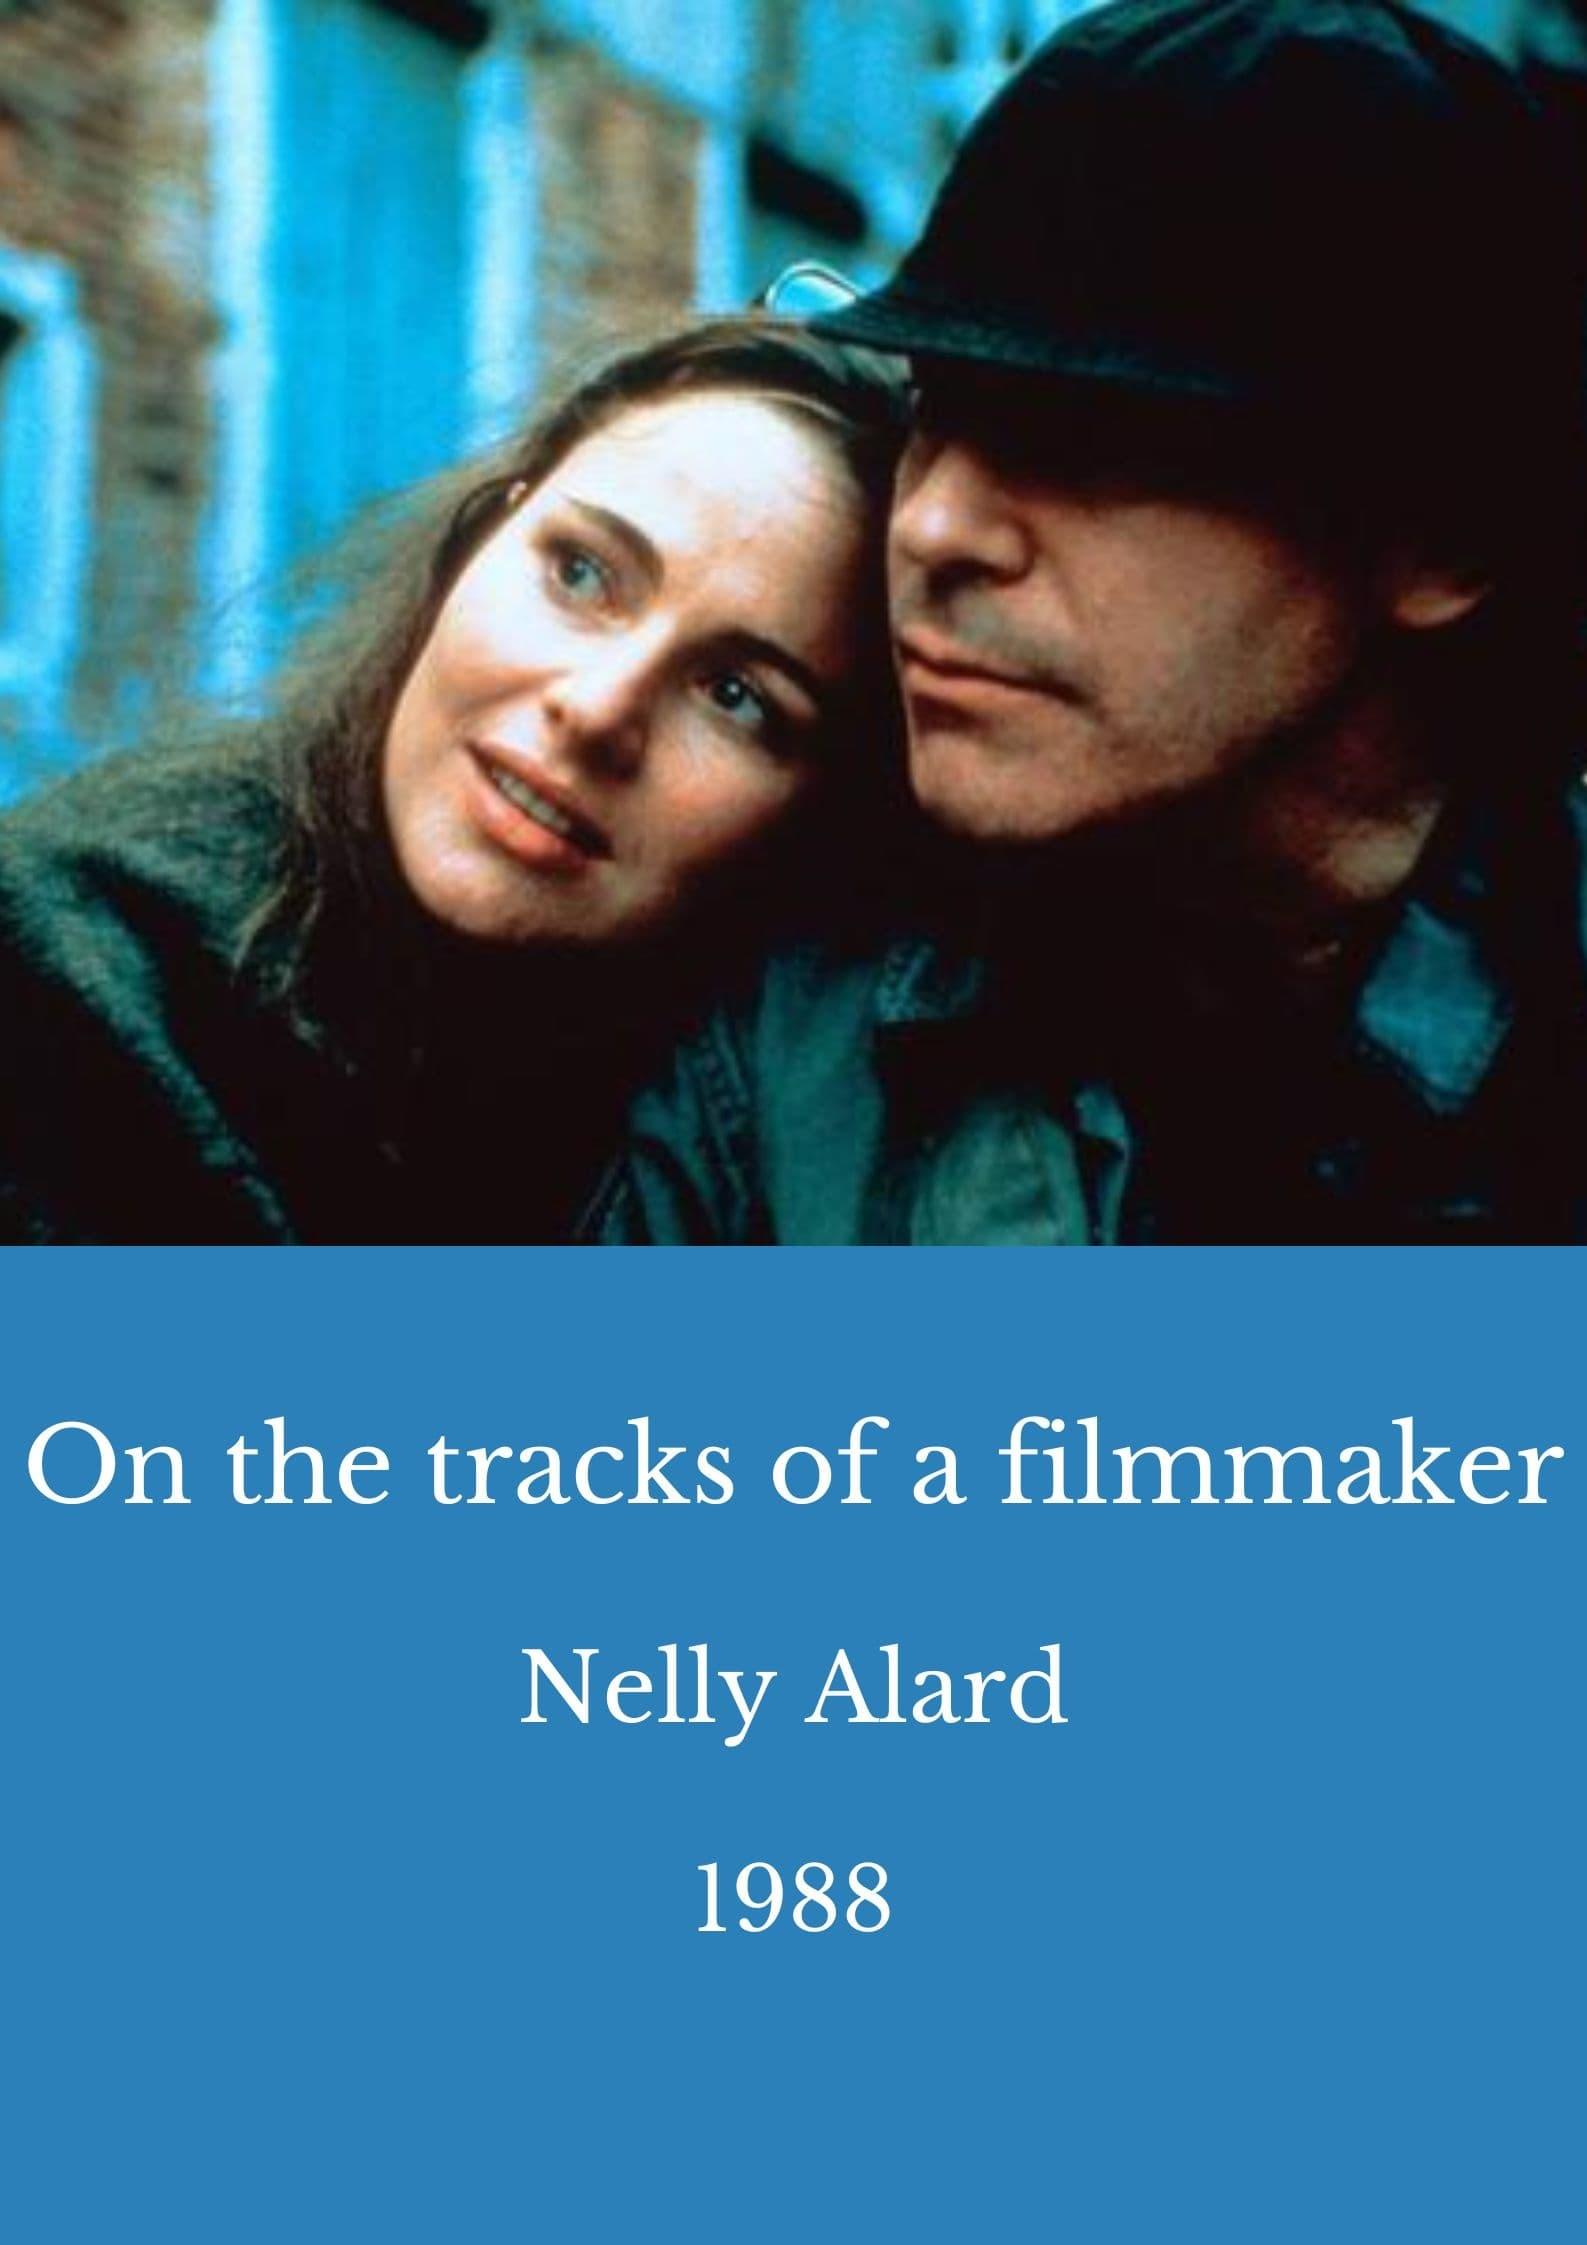 On the tracks of a filmmaker poster